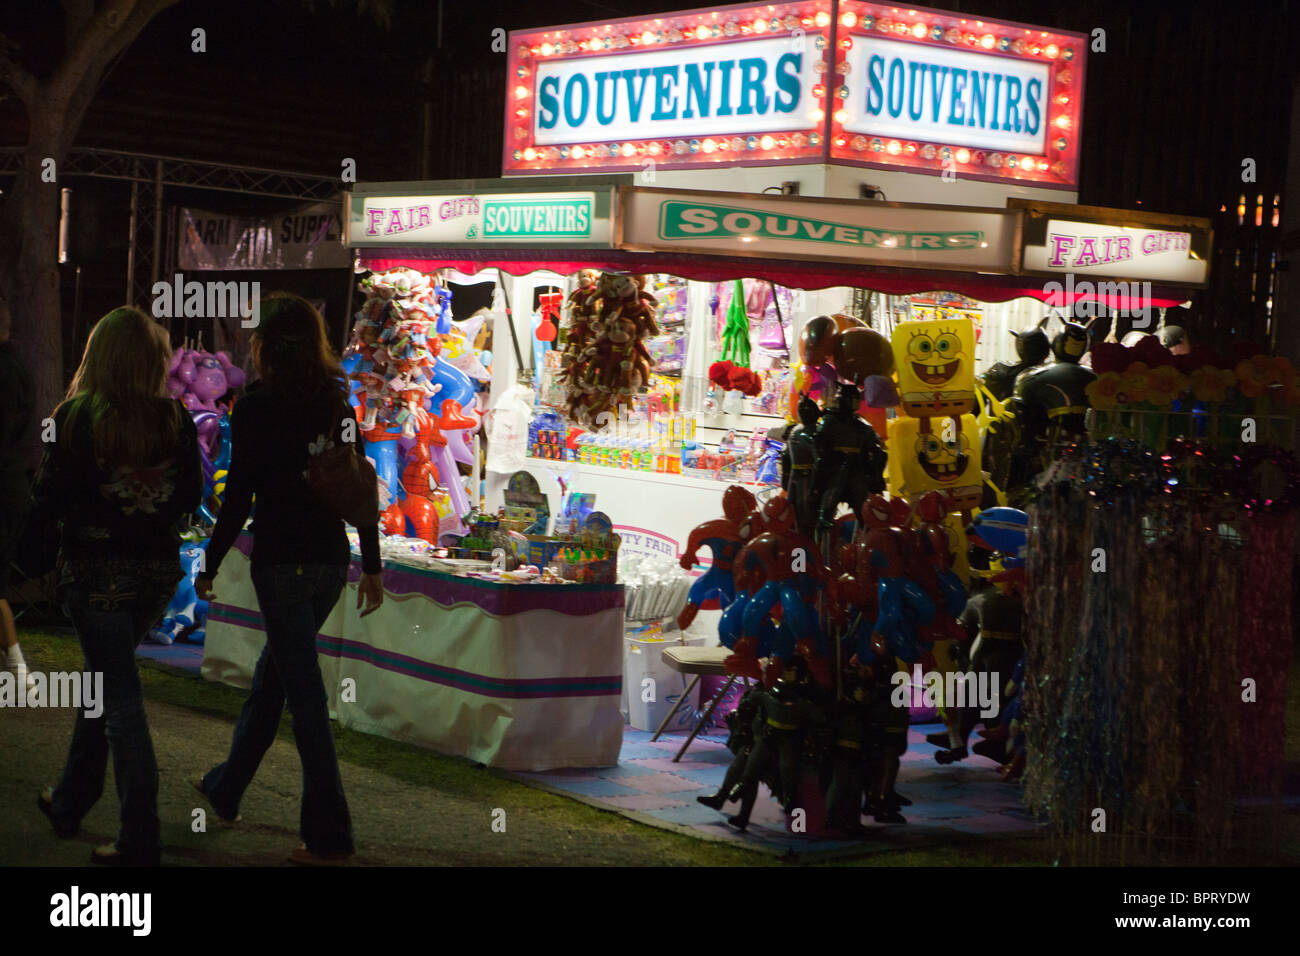 https://c8.alamy.com/comp/BPRYDW/people-walking-past-a-lighted-souvenir-stand-at-night-california-mid-BPRYDW.jpg